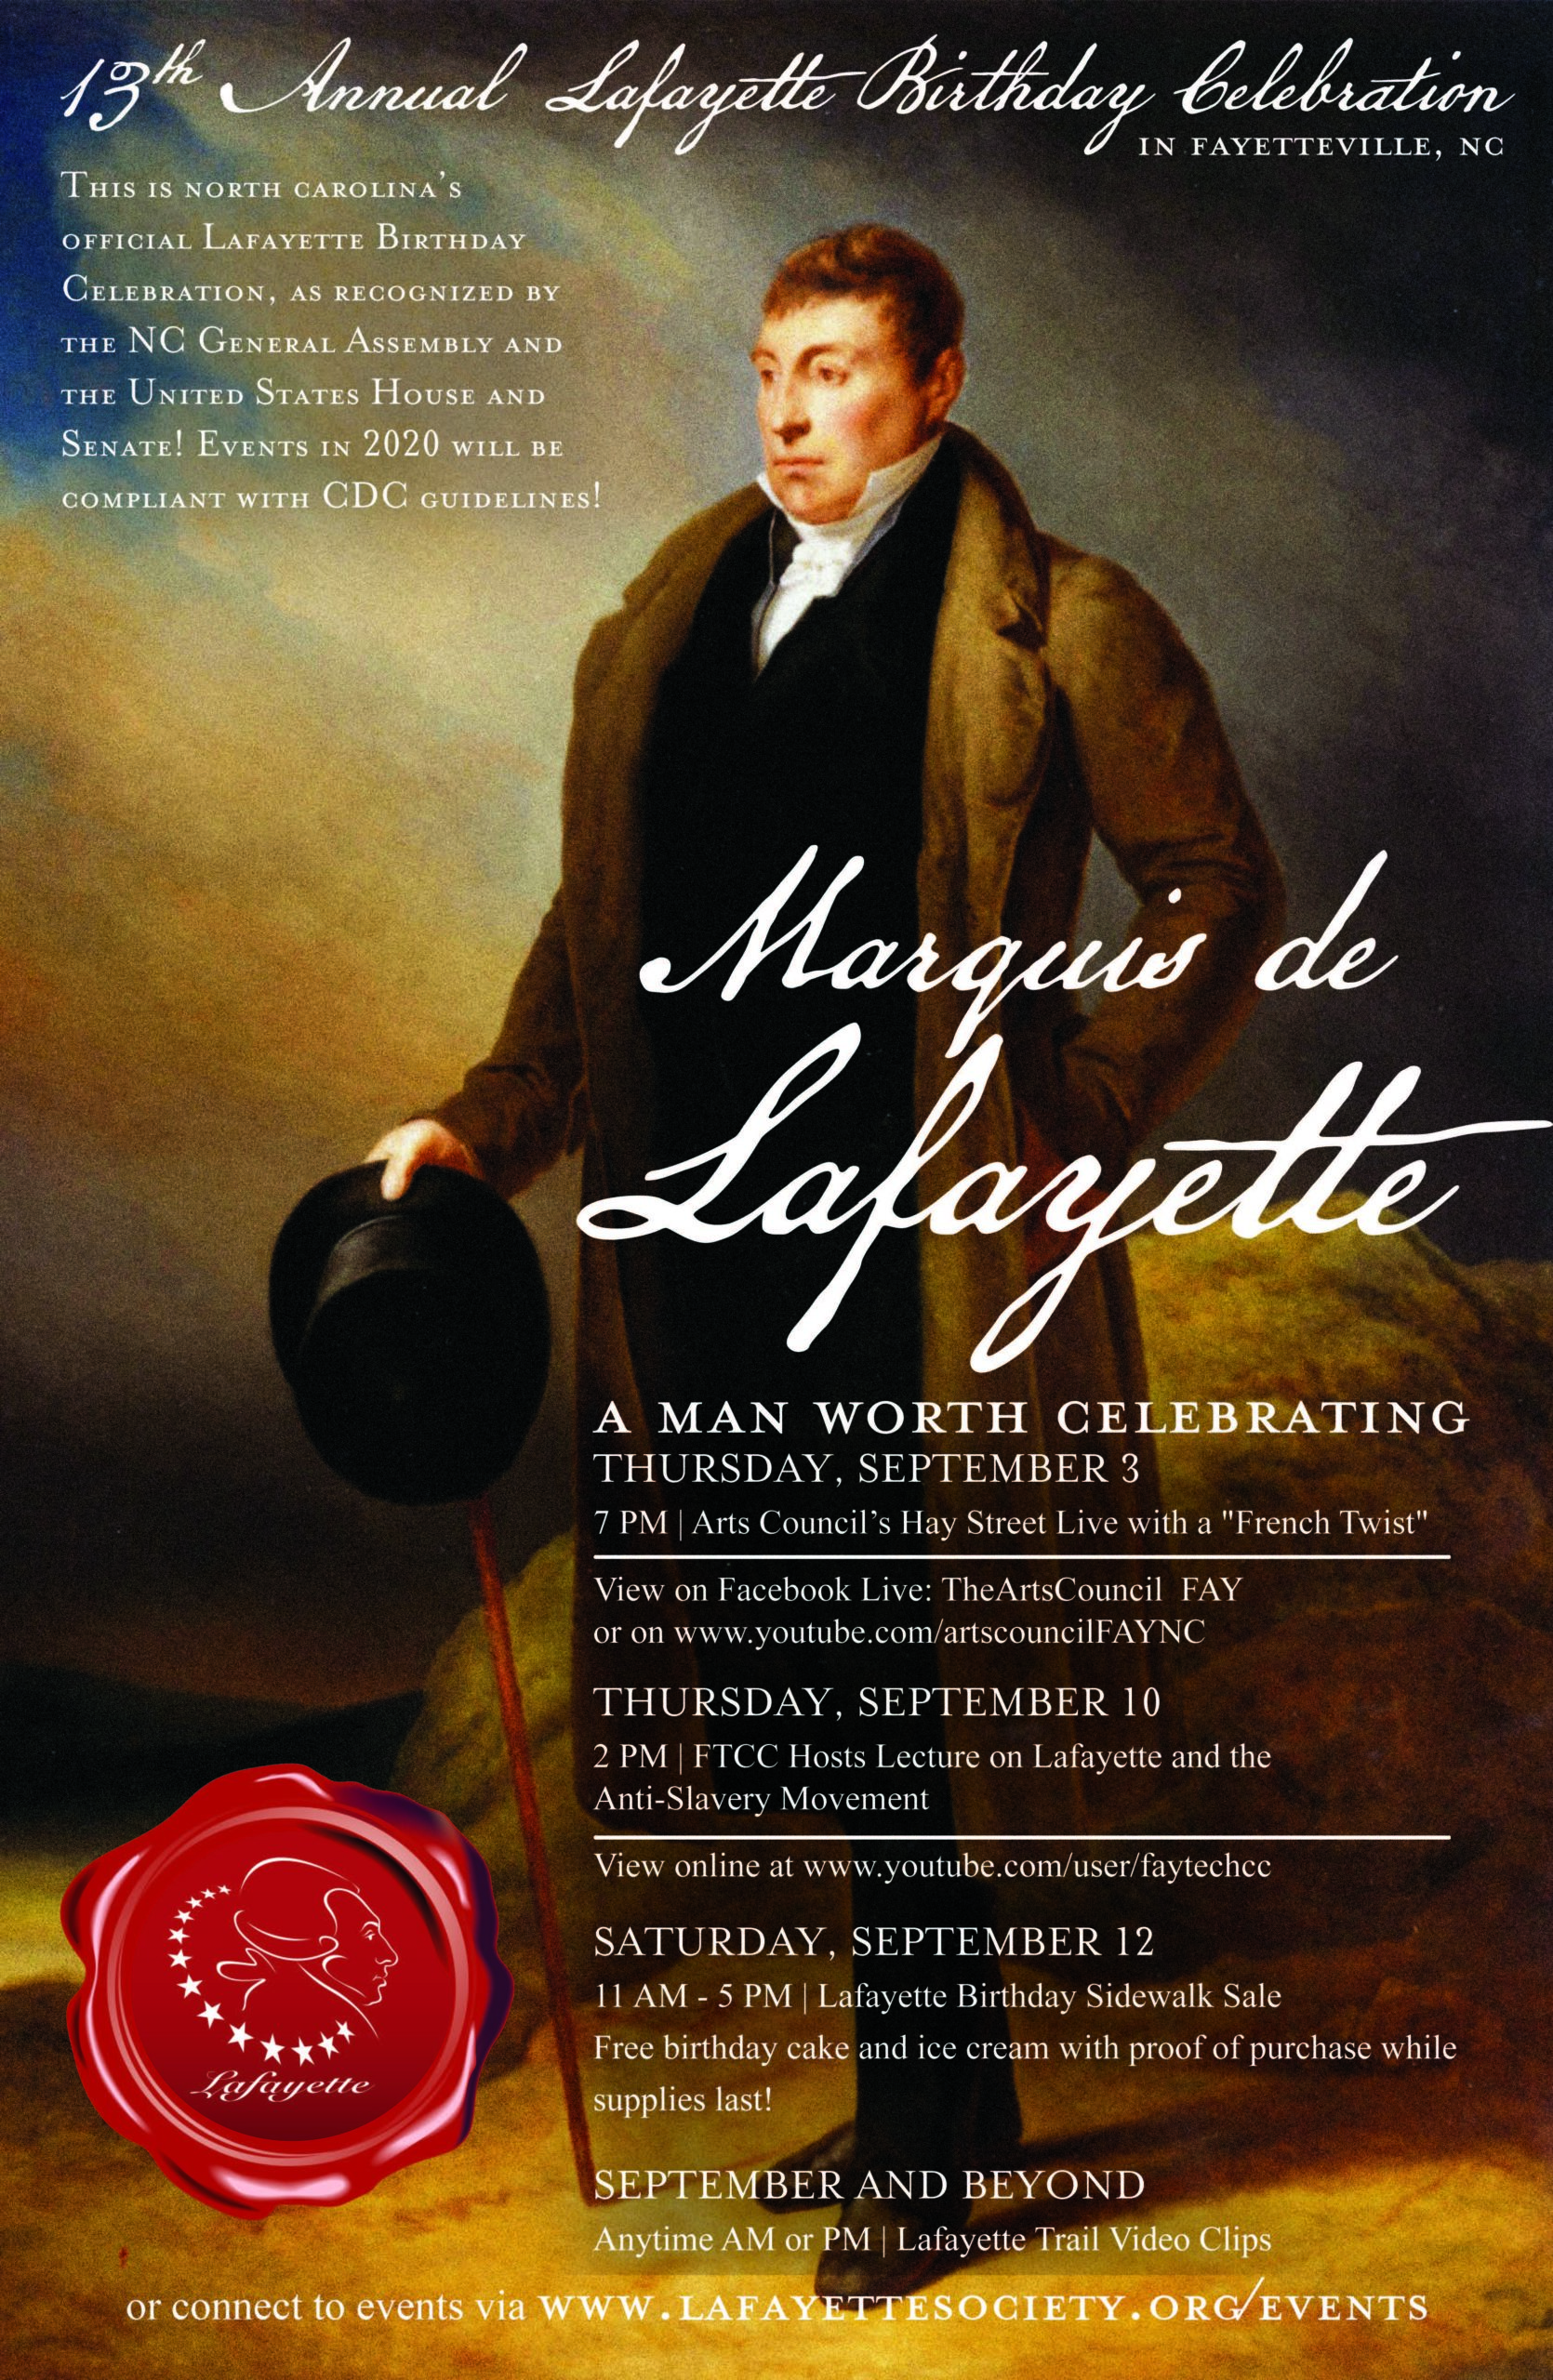 Poster for the 2020 Lafayette Birthday celebration in Fayetteville with a portrait of Lafayette by Scheffer